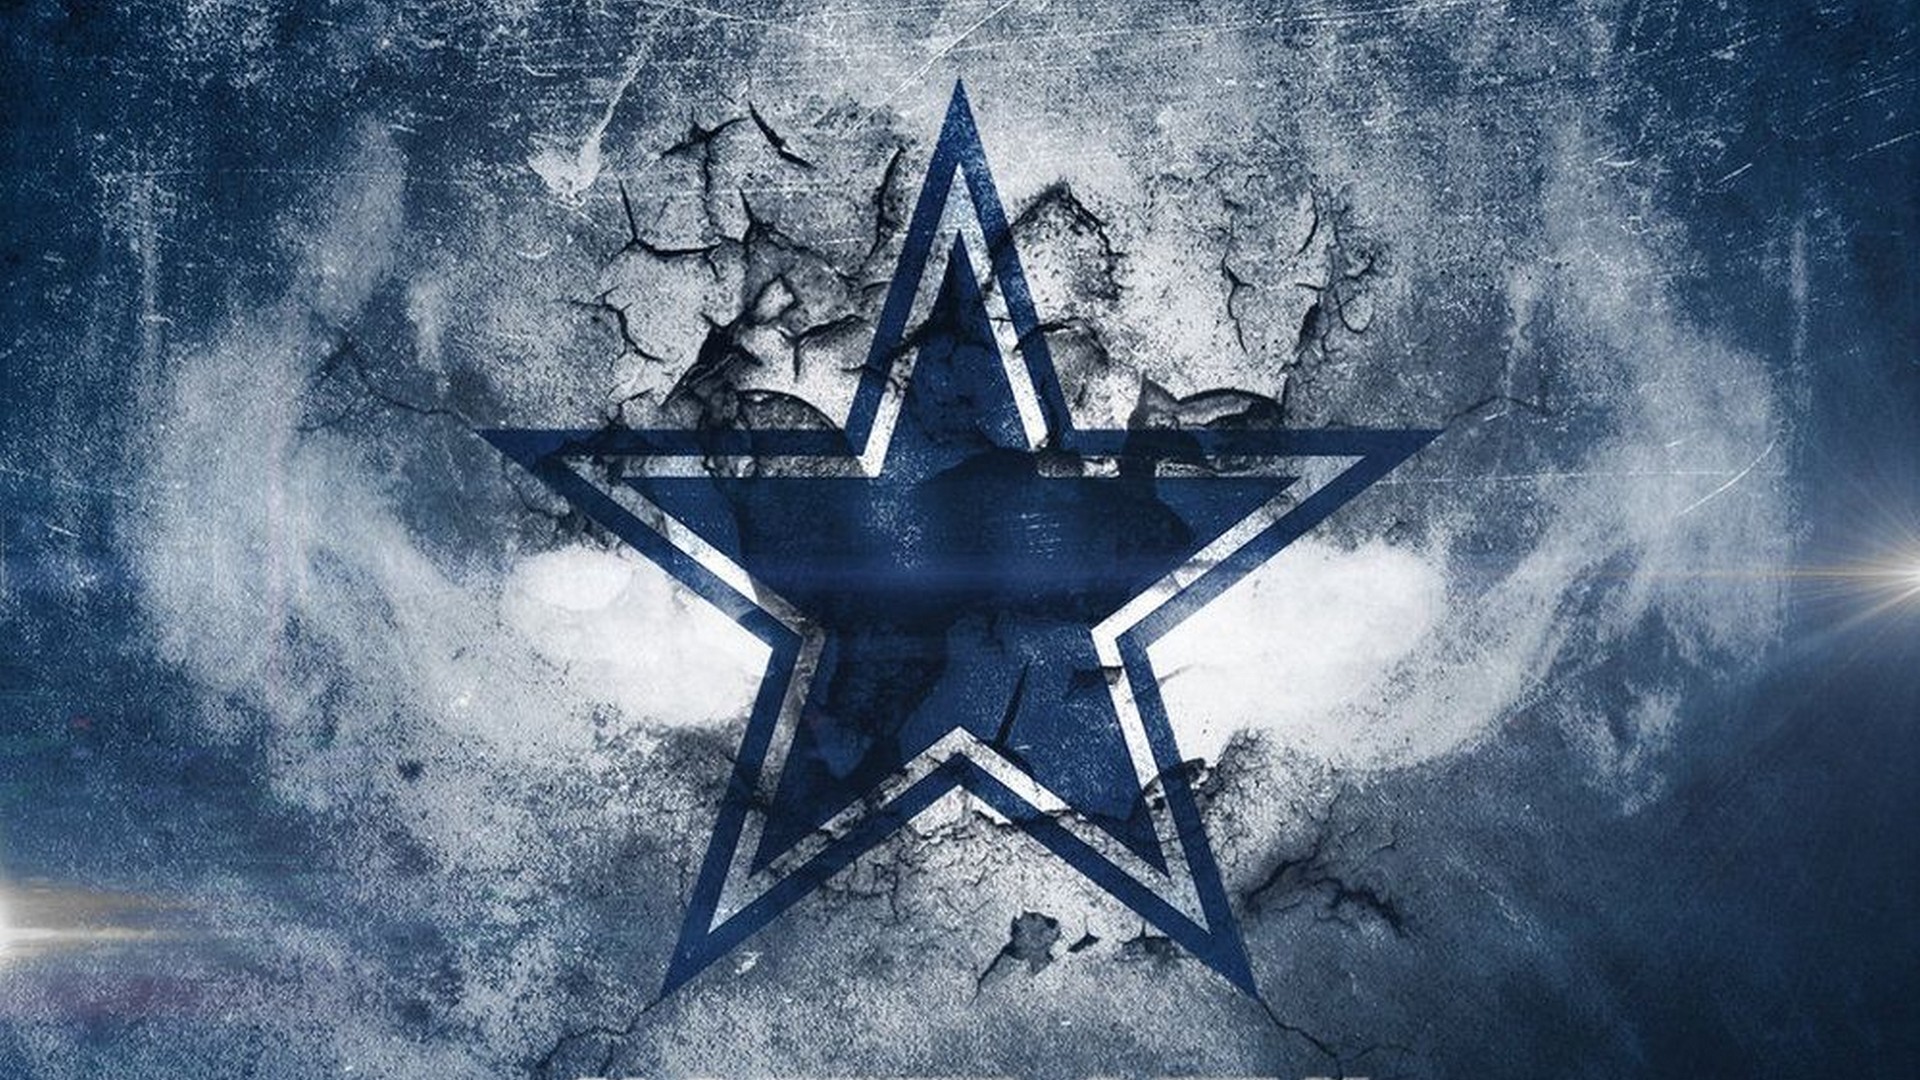 HD Backgrounds Dallas Cowboys With Resolution 1920X1080